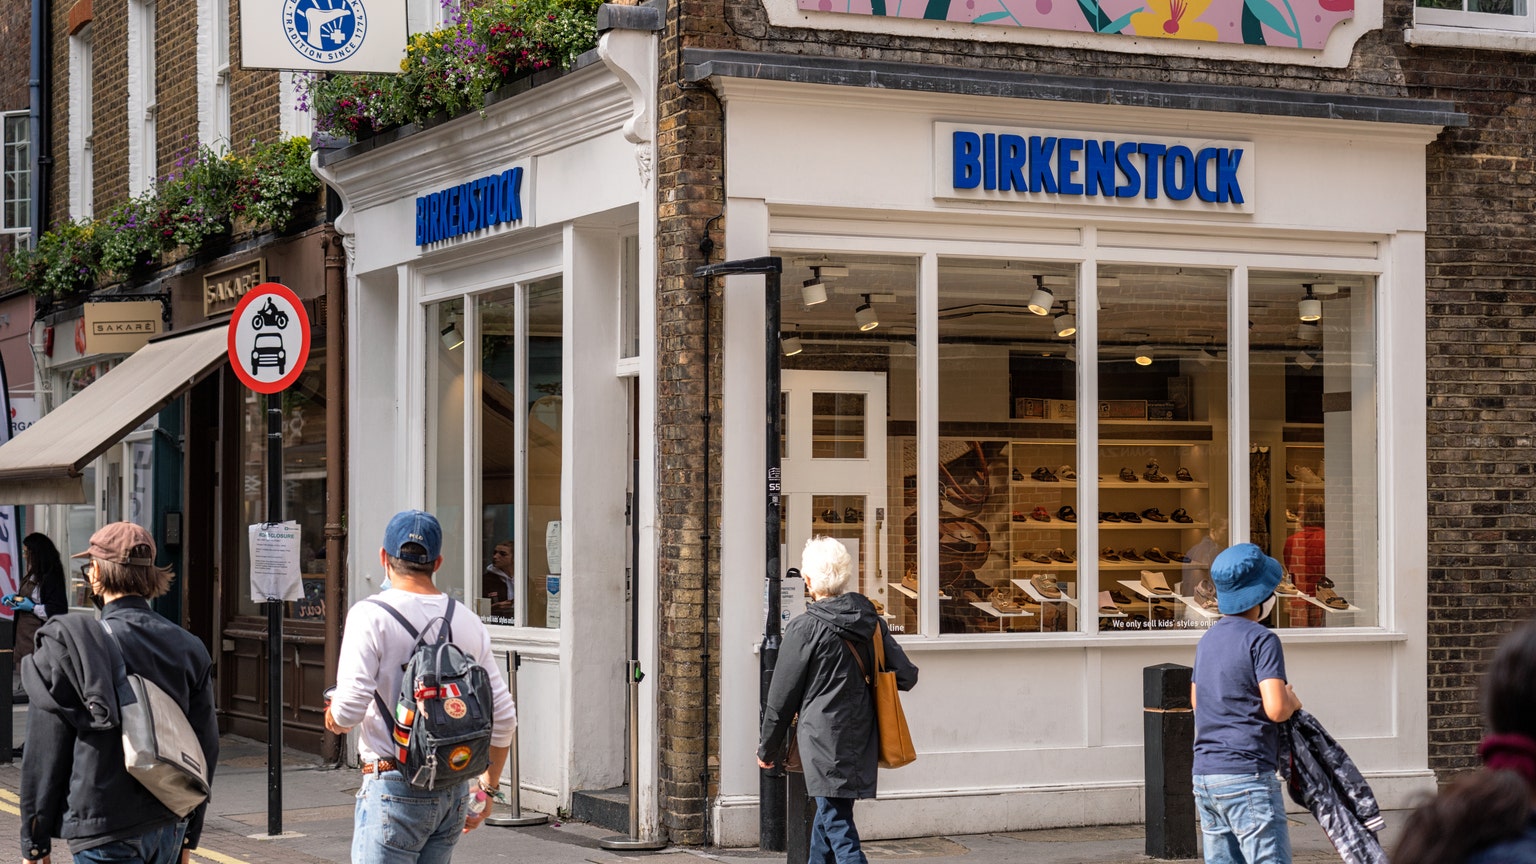 Birkenstock Files For IPO Two Years After Its $4.3 Billion Acquisition